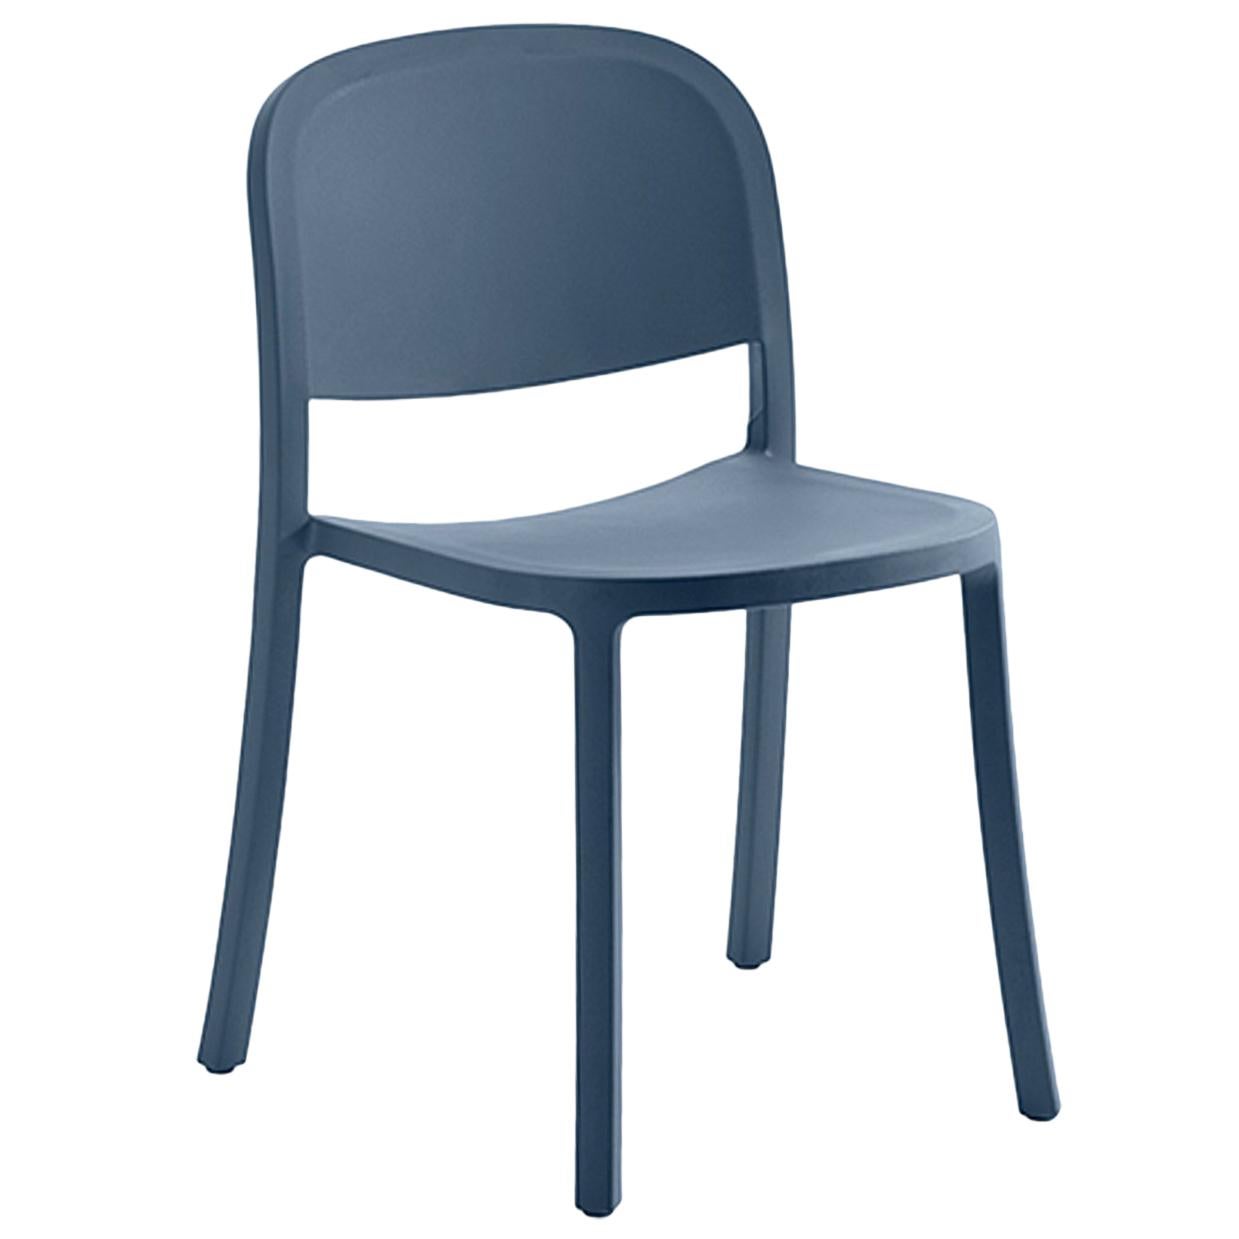 Emeco 1 Inch Reclaimed Chair in Blue by Jasper Morrison For Sale